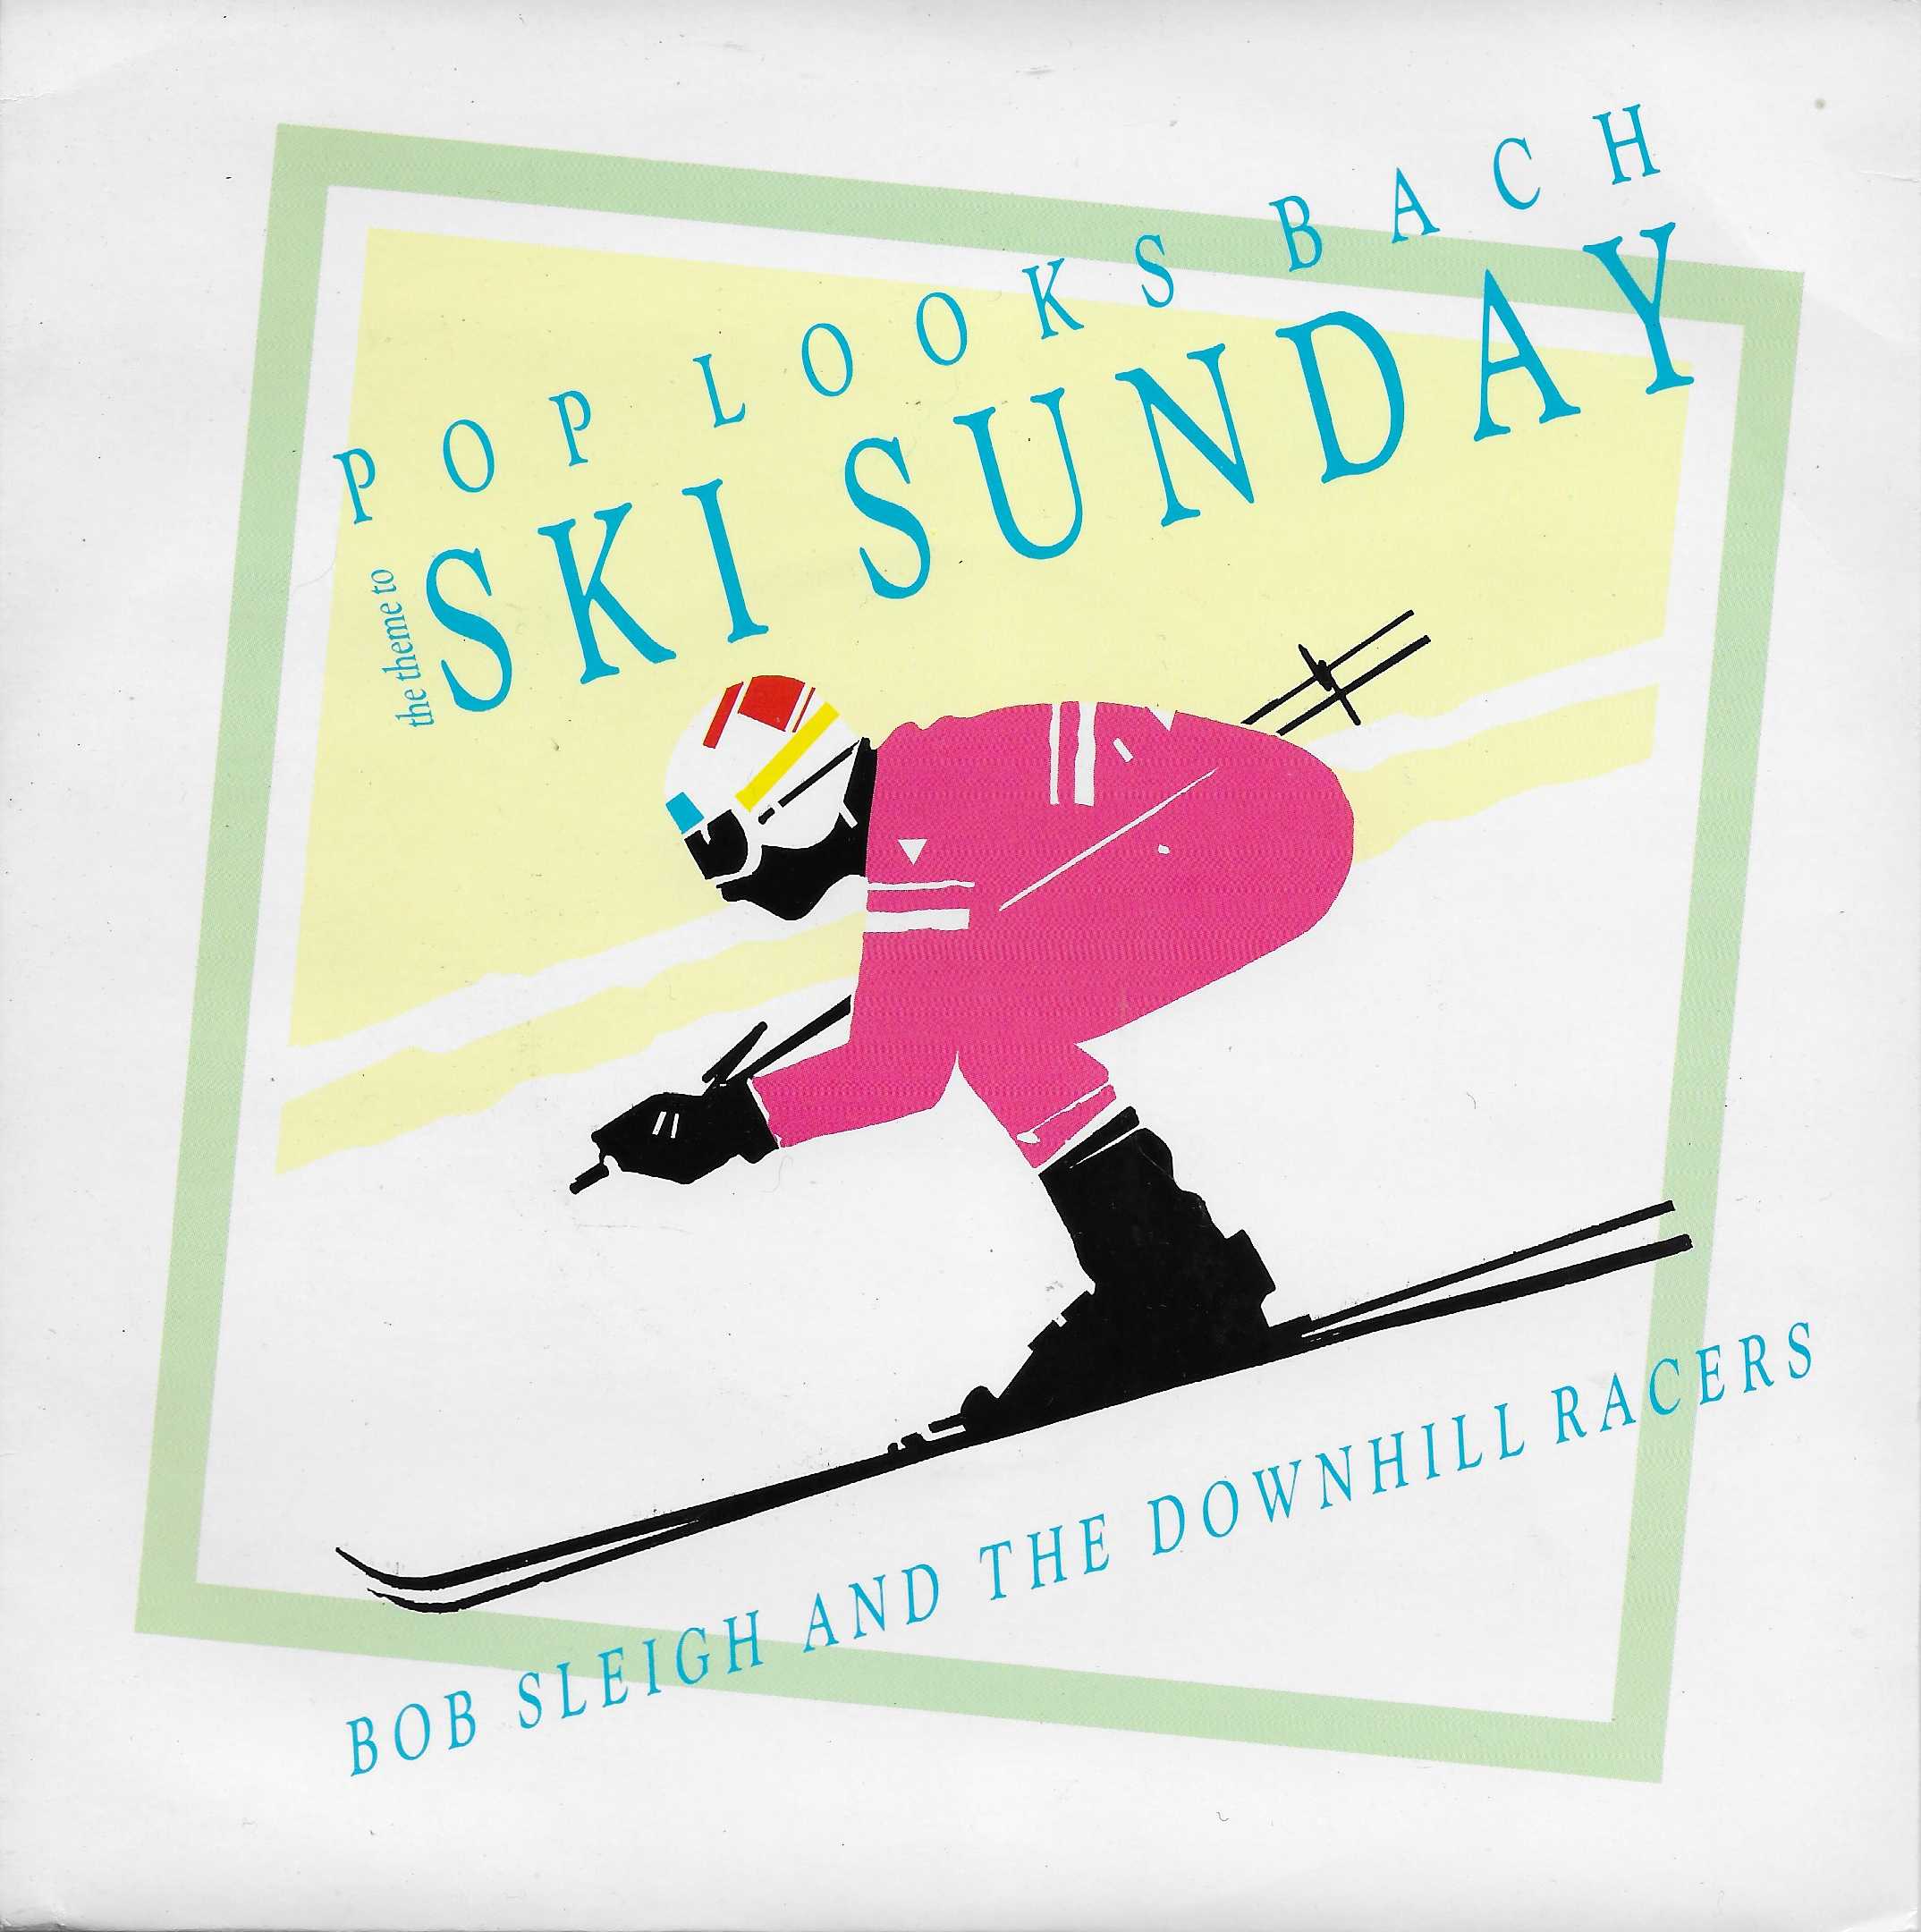 Picture of Pop looks Bach (Ski Sunday) by artist San Fonteyn / Bob Sleigh and the Downhill Racers from the BBC singles - Records and Tapes library